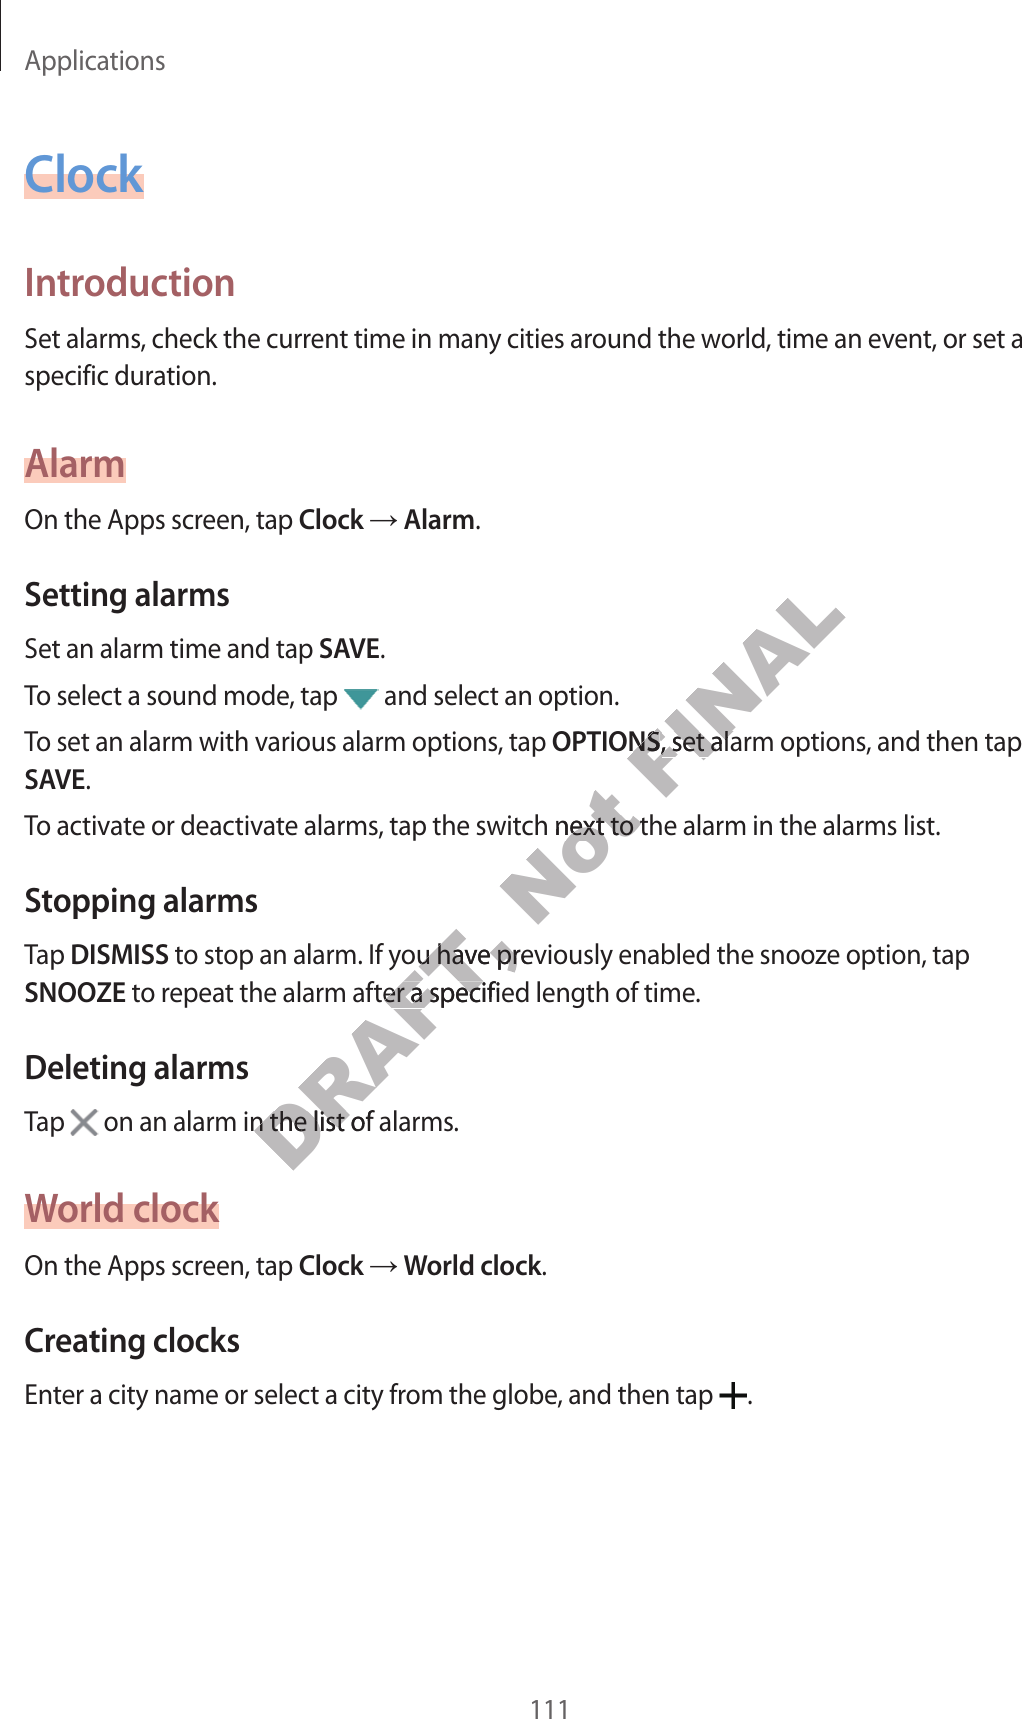 Applications111ClockIntroductionSet alarms, check the current time in many cities around the world, time an event, or set a specific duration.AlarmOn the Apps screen, tap Clock ĺ Alarm.Setting alarmsSet an alarm time and tap SAVE.To select a sound mode, tap   and select an option.To set an alarm with various alarm options, tap OPTIONS, set alarm options, and then tap SAVE.To activate or deactivate alarms, tap the switch next to the alarm in the alarms list.Stopping alarmsTap DISMISS to stop an alarm. If you have previously enabled the snooze option, tap SNOOZE to repeat the alarm after a specified length of time.Deleting alarmsTap   on an alarm in the list of alarms.World clockOn the Apps screen, tap Clock ĺ World clock.Creating clocksEnter a city name or select a city from the globe, and then tap  .f you have previously enabled the snoof you have previously enabled the snooDRAFT, m after a specified length of timem after a specified length of timem in the list of alarm in the list of alarNot , tap the switch next to the alarch next to the alarFINALOPTIONSOPTIONS, set alar, set alar